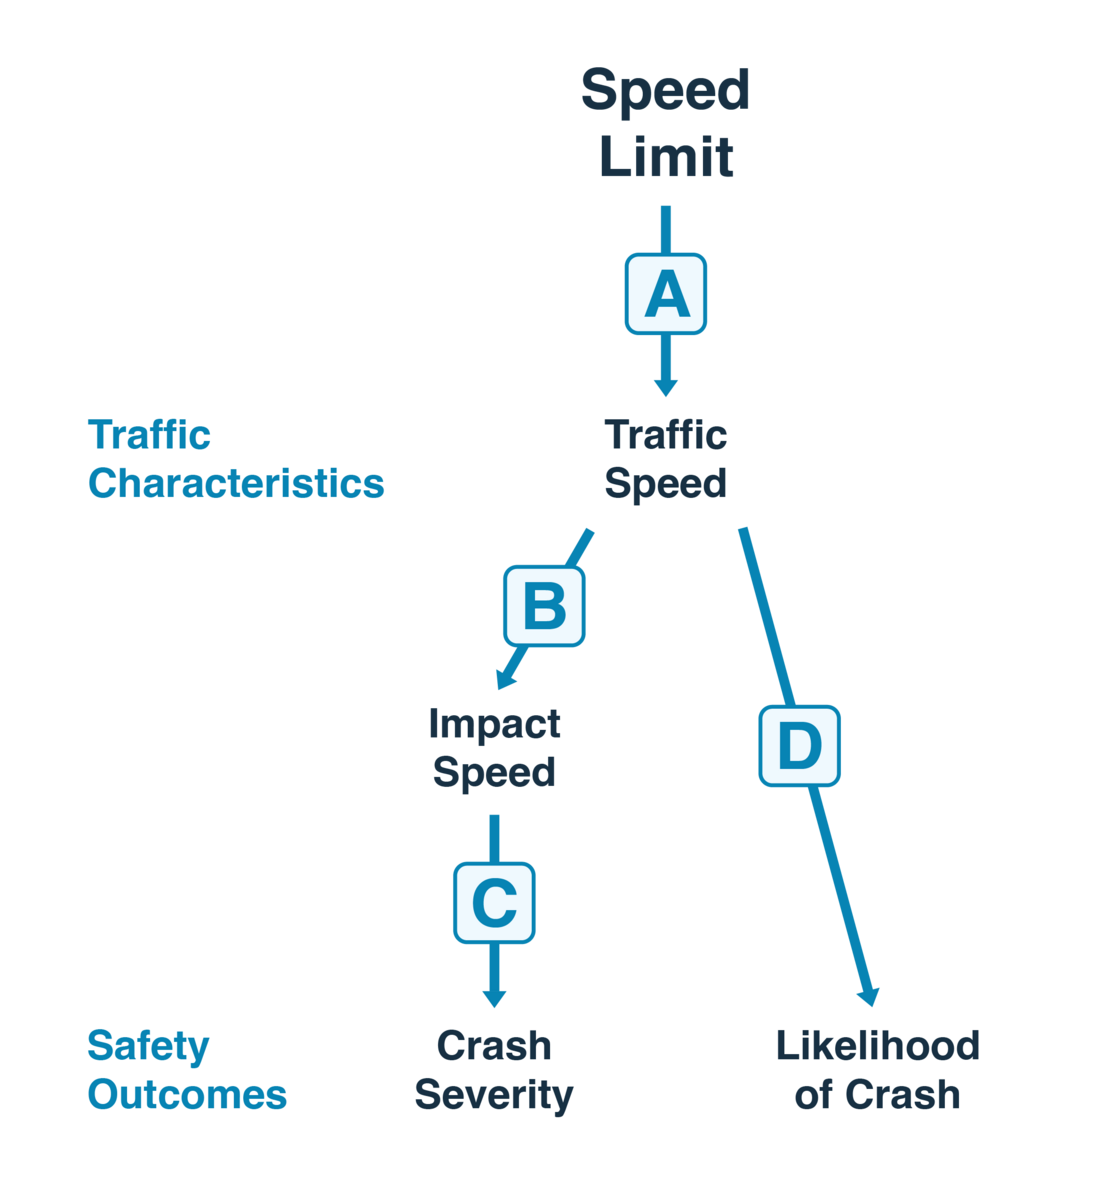 Flow chart detailing how speed limits affect traffic characteristics and safety outcomes. For more information, please see the following summary.